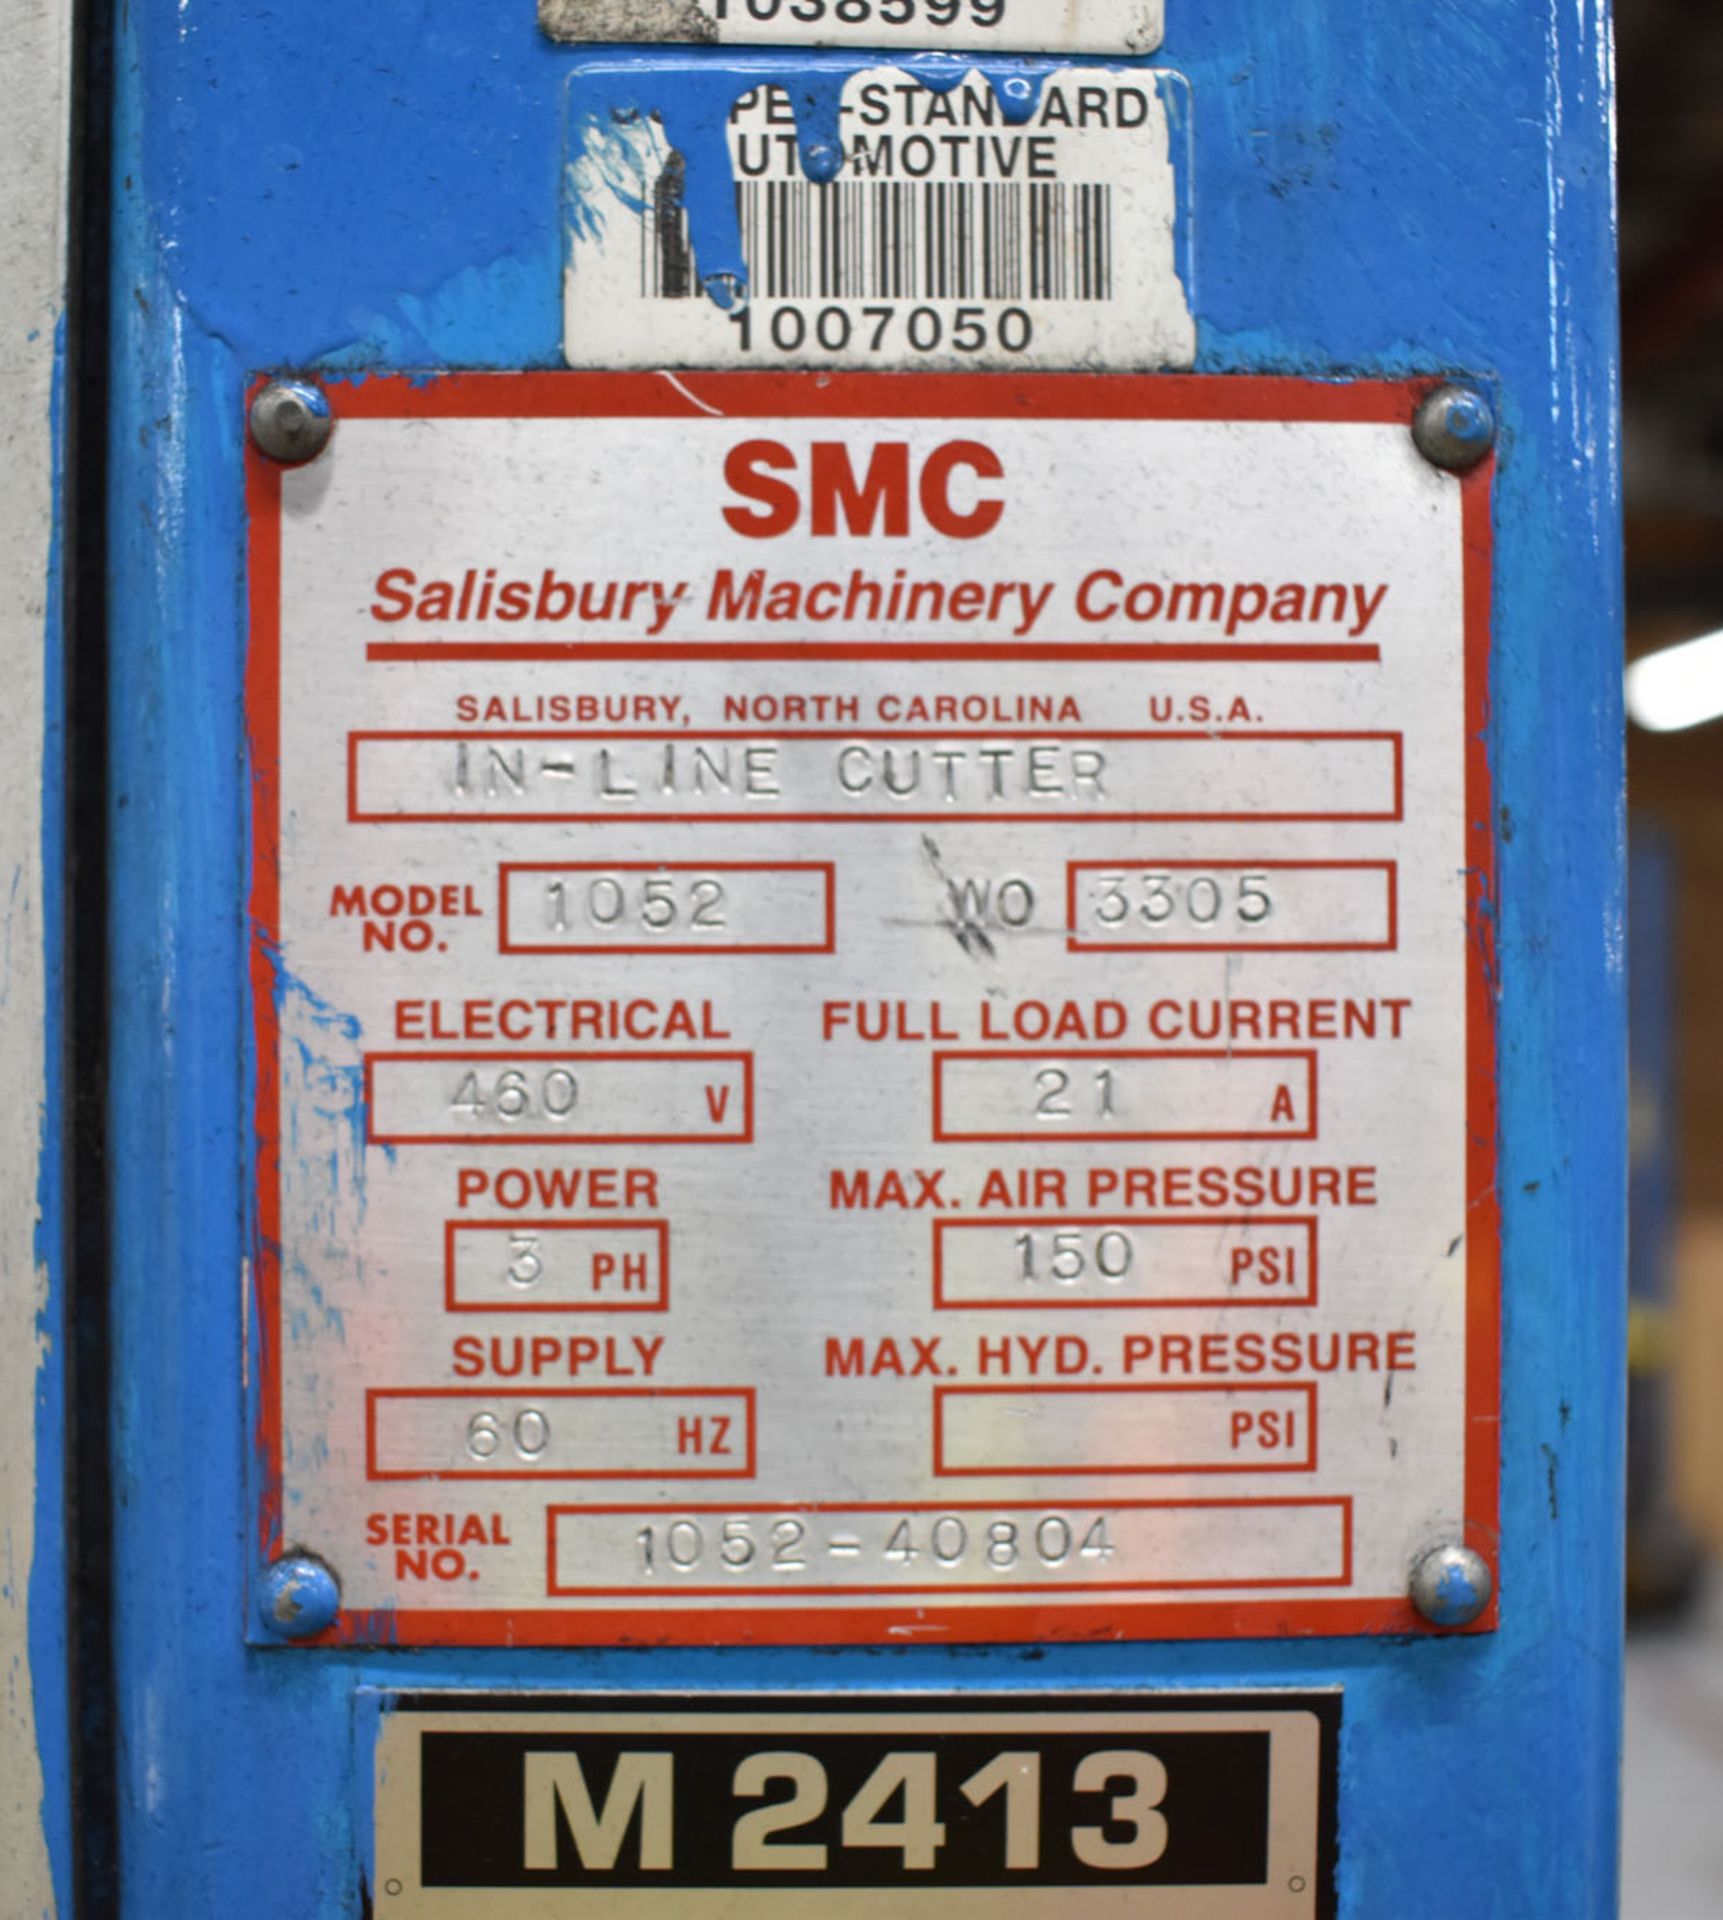 SMC MODEL 1052 IN-LINE CUTTER MACHINE WITH APPROX. 40FPM FEED RATE, S/N: 1052-40804 (CI) [RIGGING - Image 8 of 8